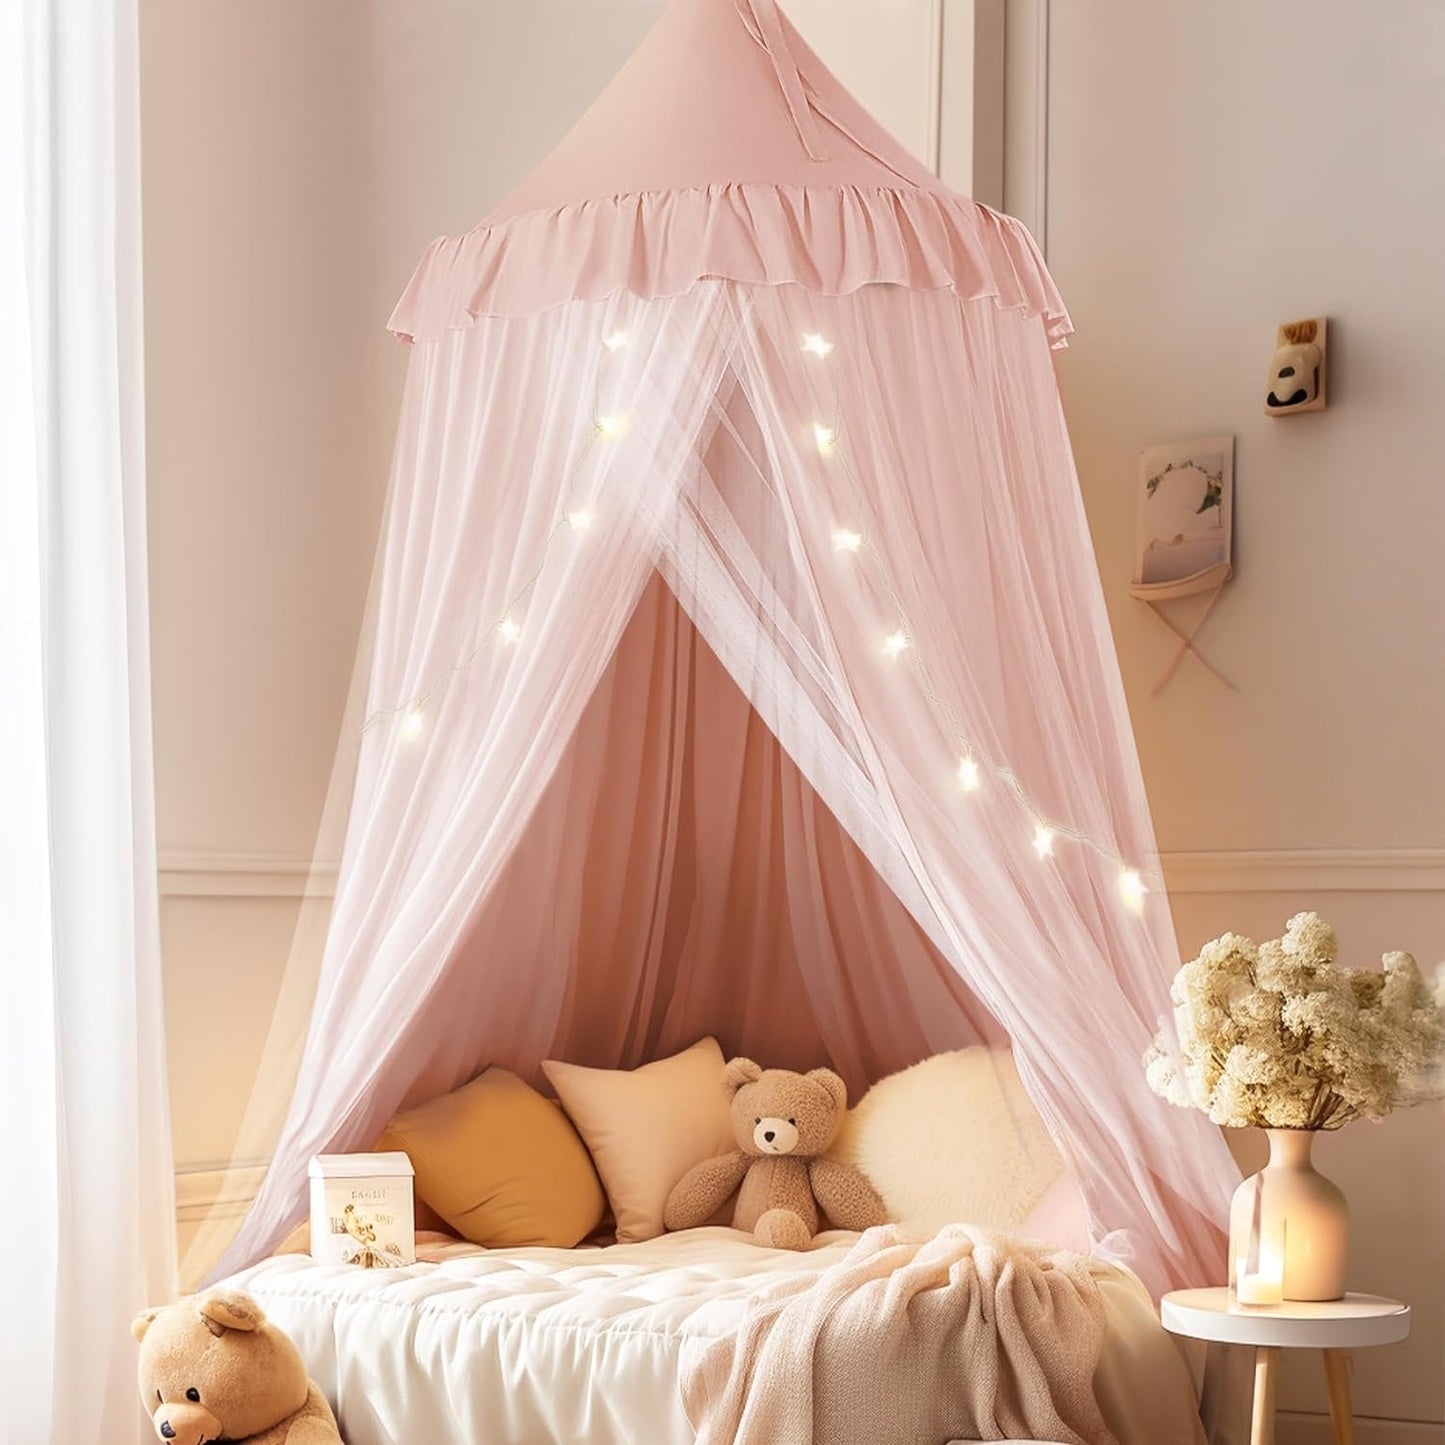 Bed Canopy with Star Lights, Double Layer Canopy for Bed